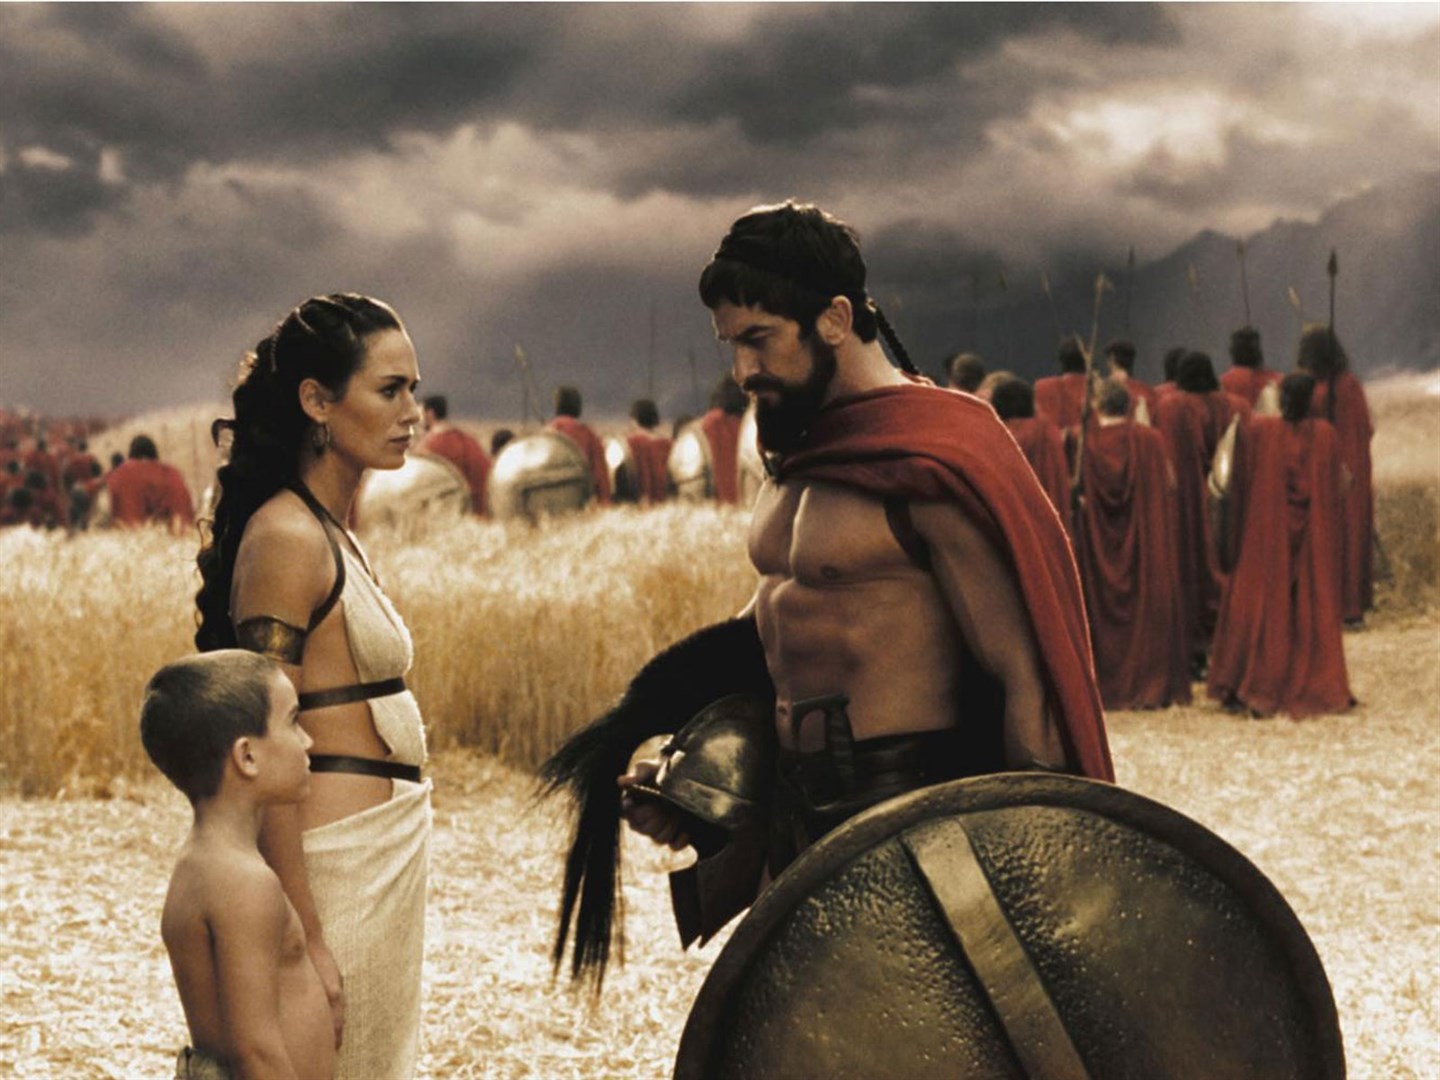 Gerard Butler in a still from 300: Rise Of An Empire